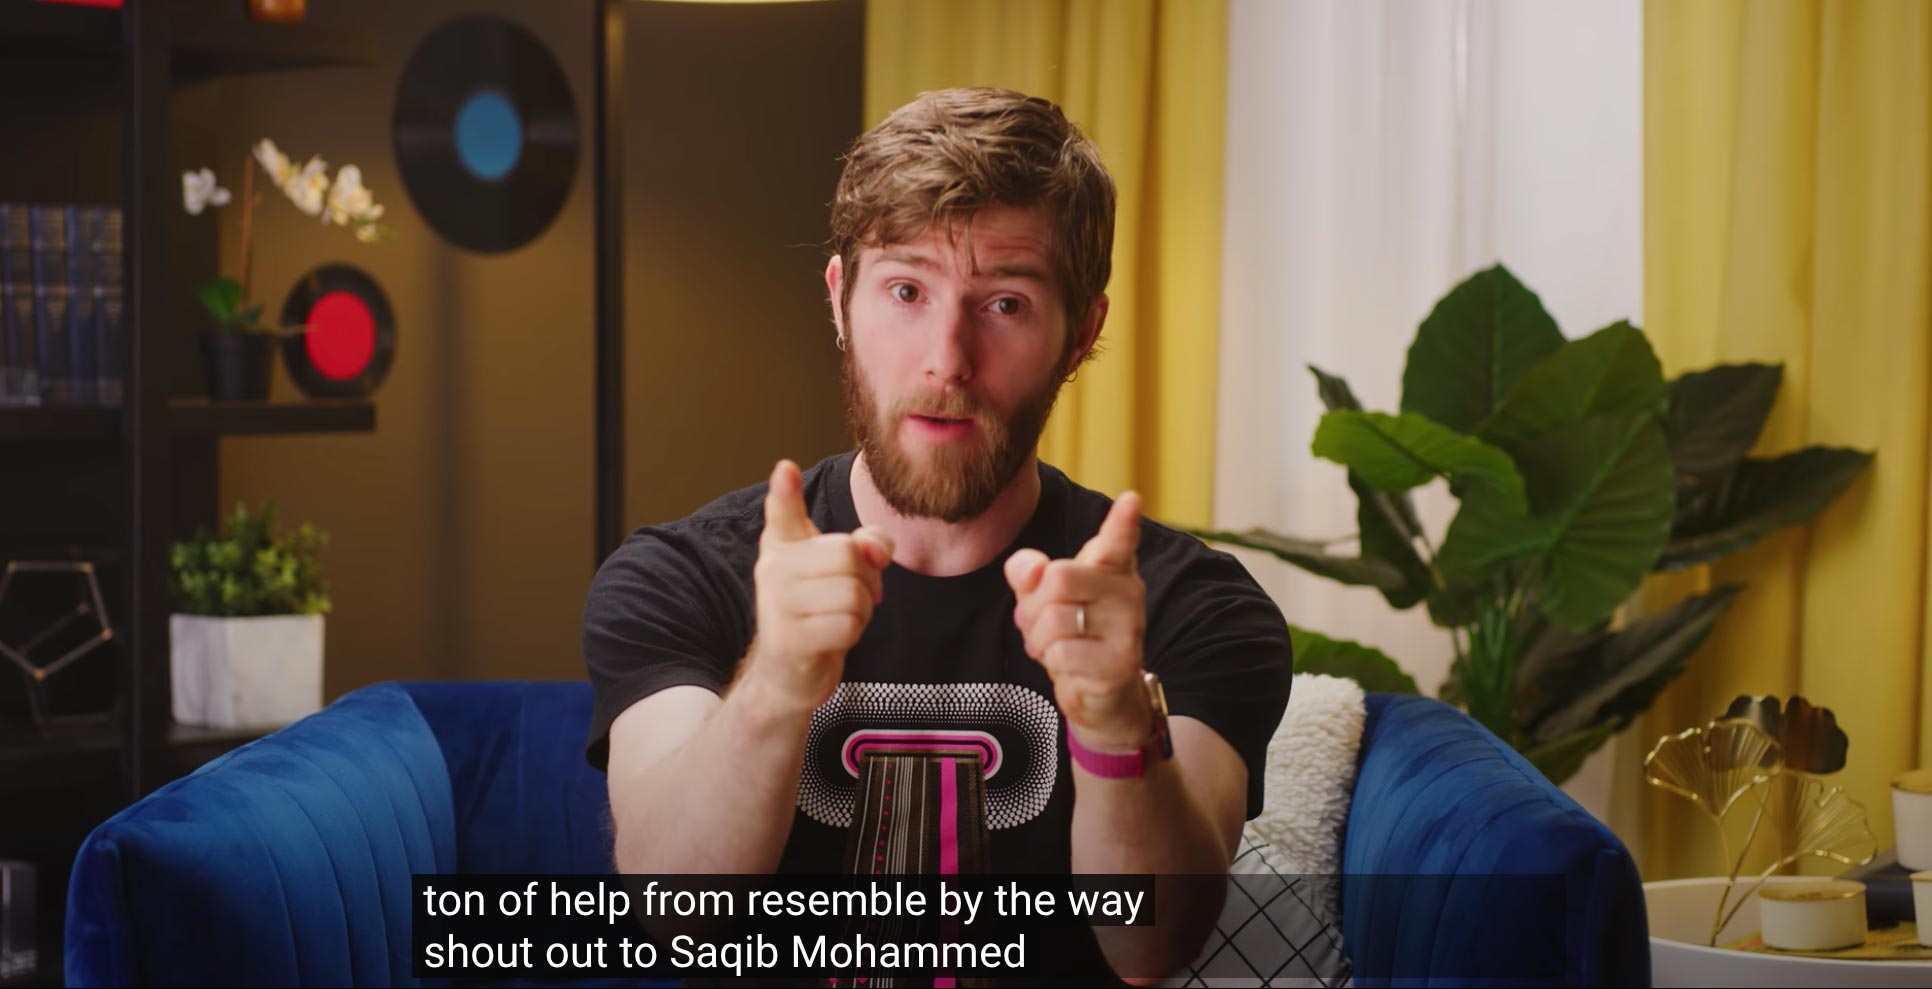 Does make tech tips much how linus How Much